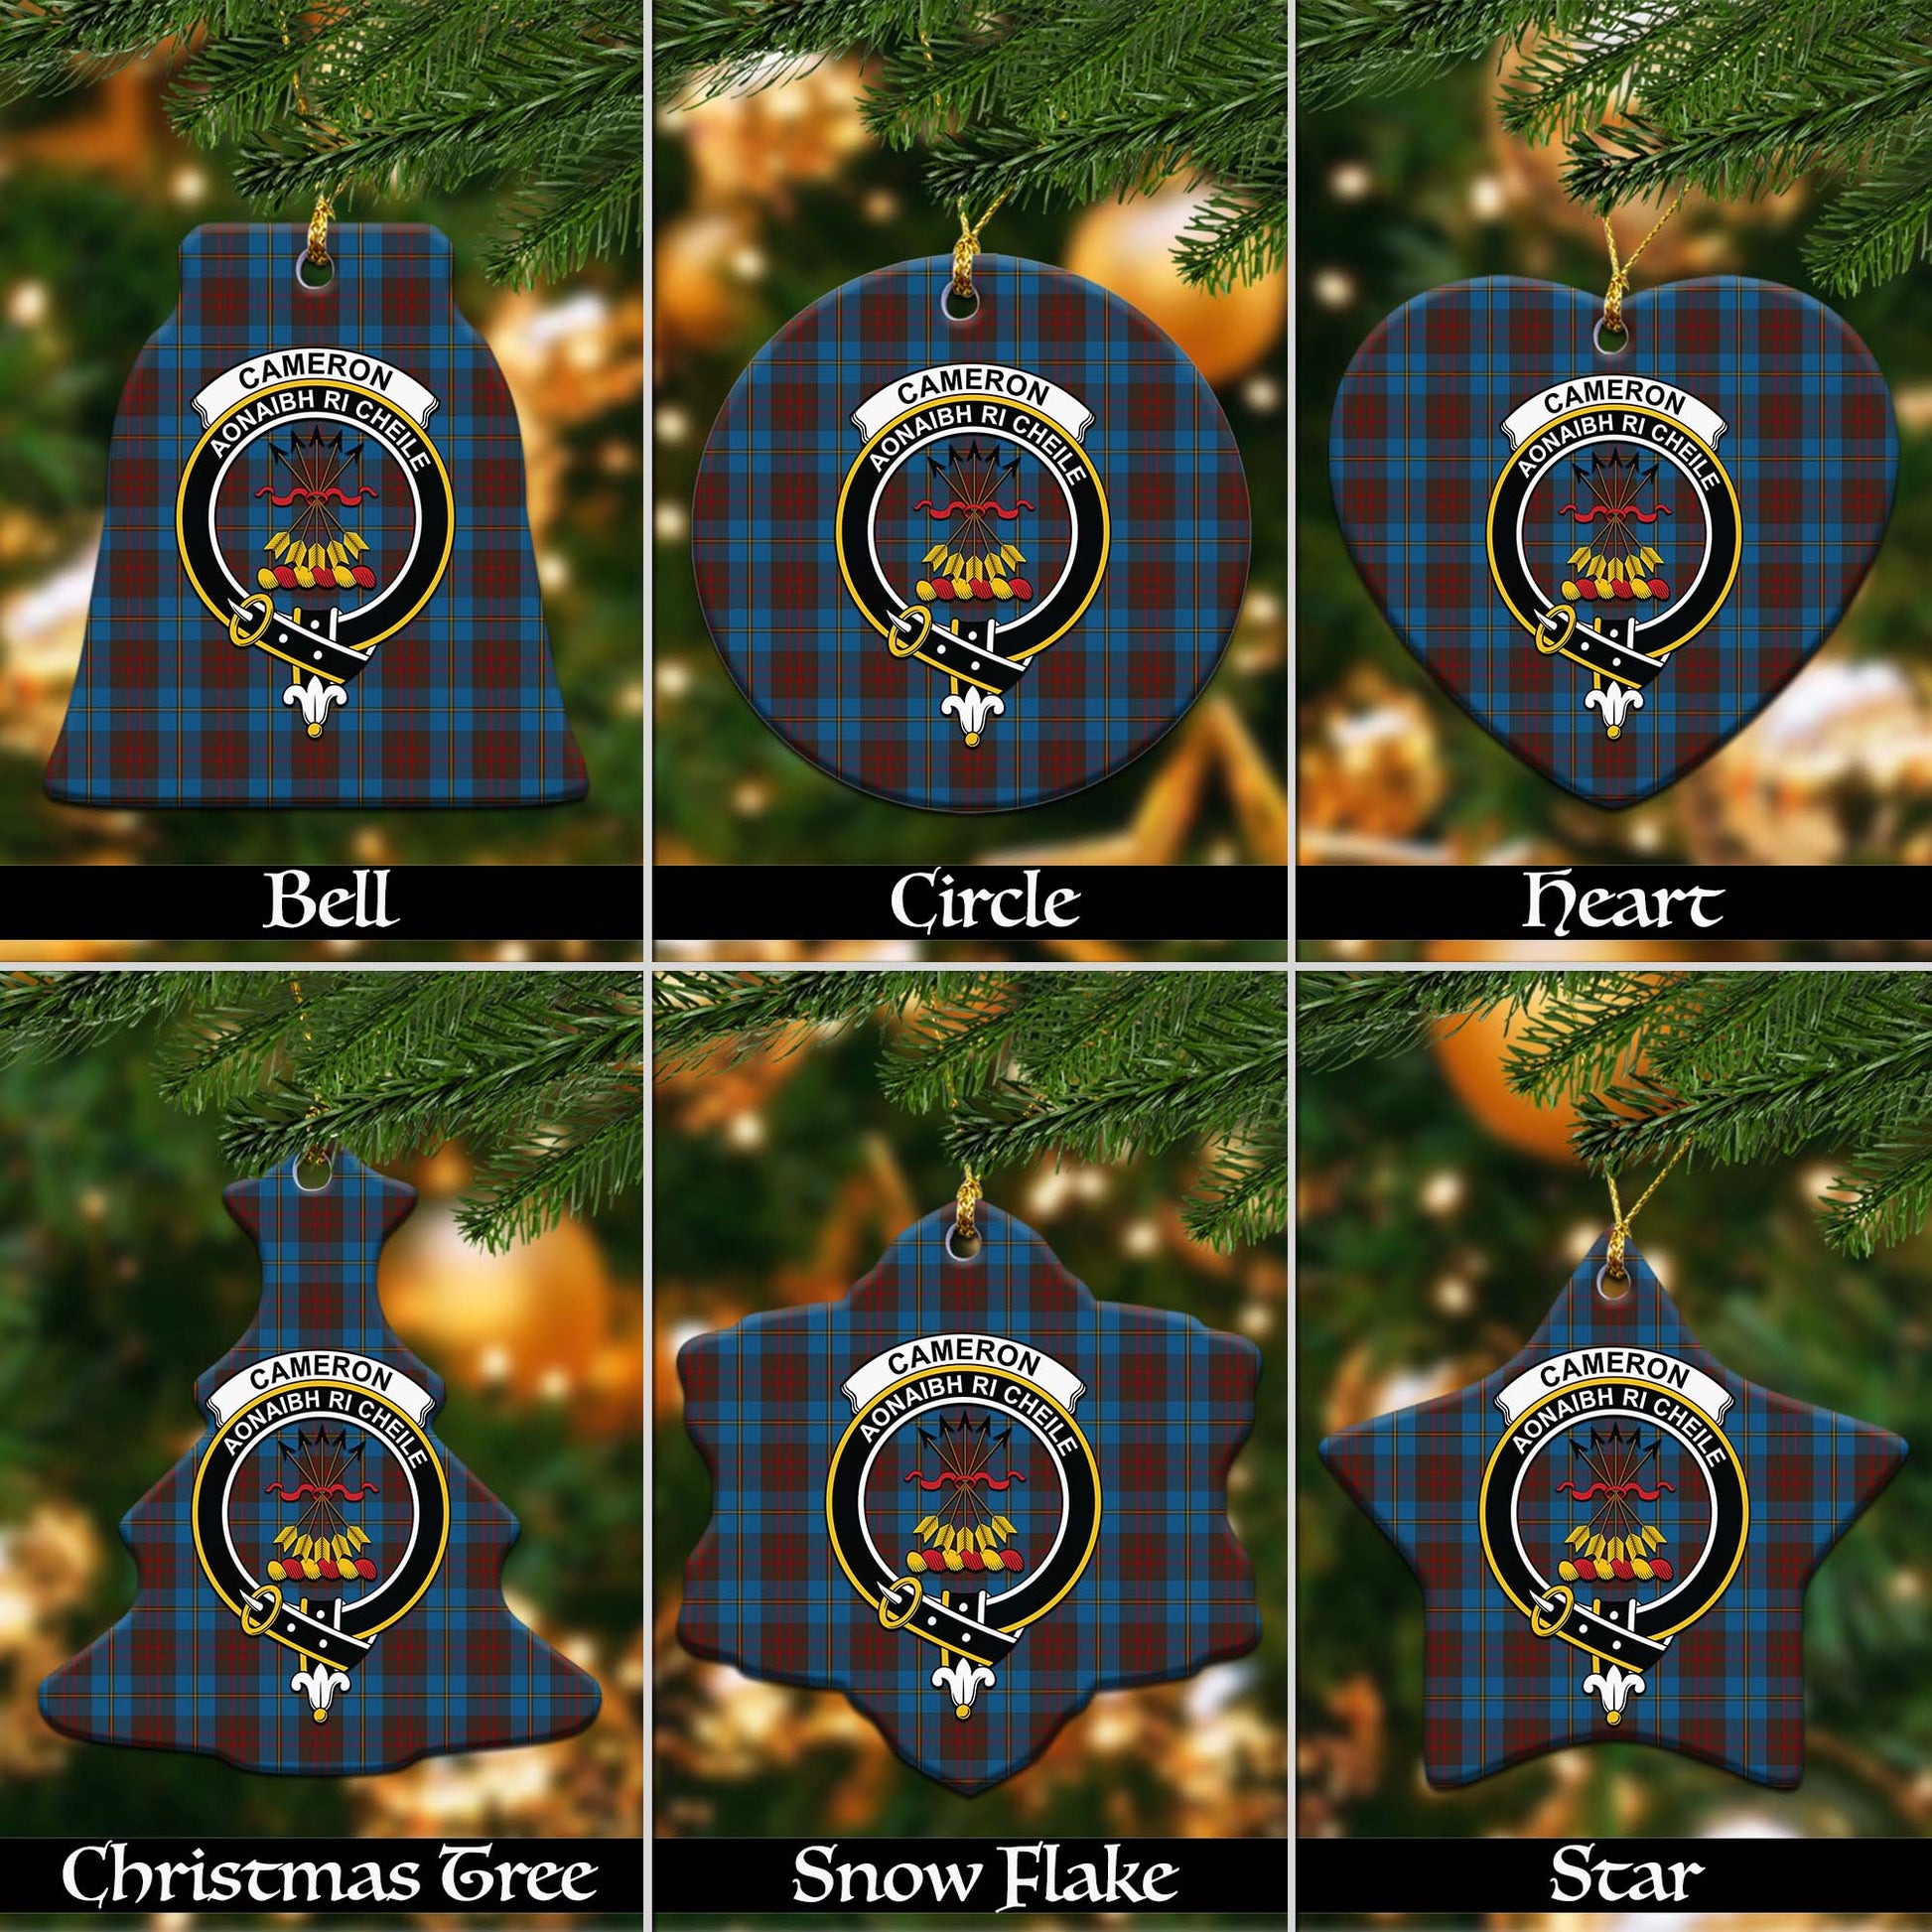 Cameron Hunting Tartan Christmas Ornaments with Family Crest Ceramic Bell Pack 1: ornament * 1 piece - Tartanvibesclothing